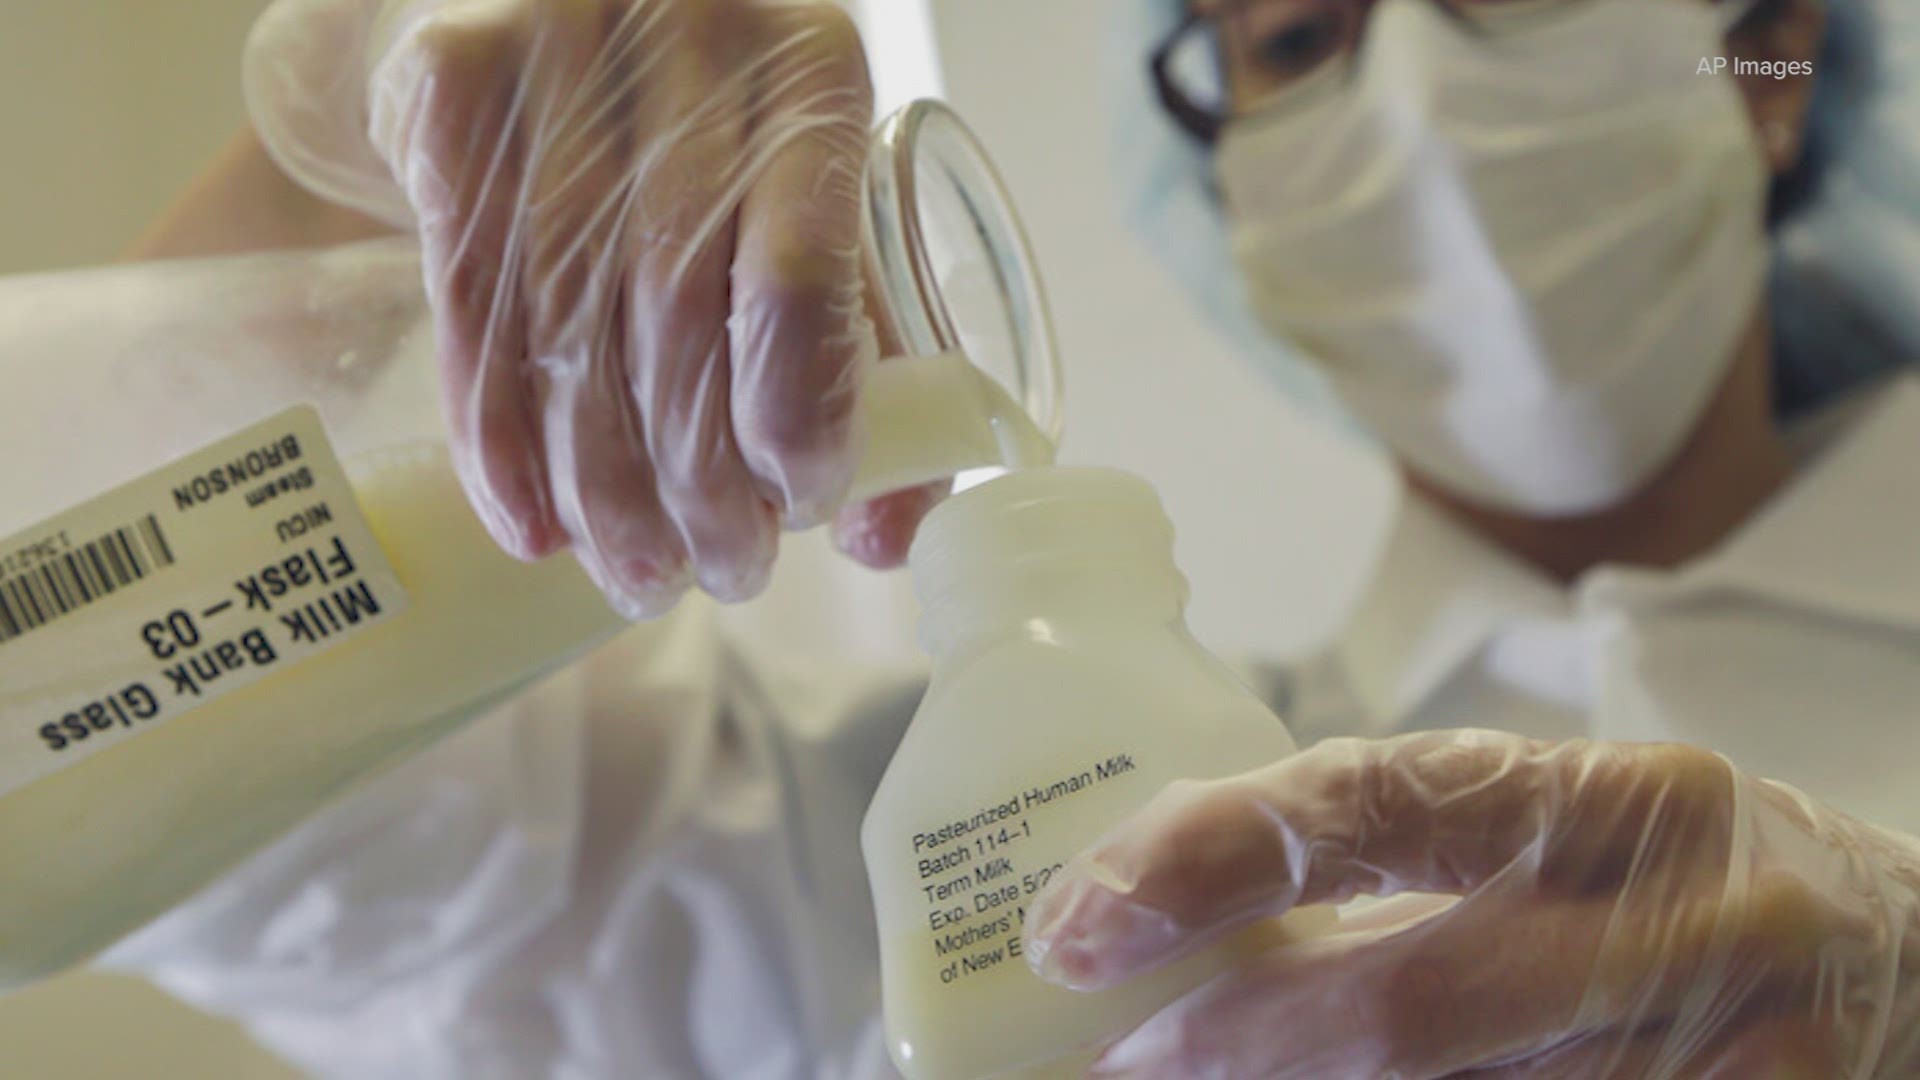 New research is raising concern over toxic chemicals detected in breast milk.